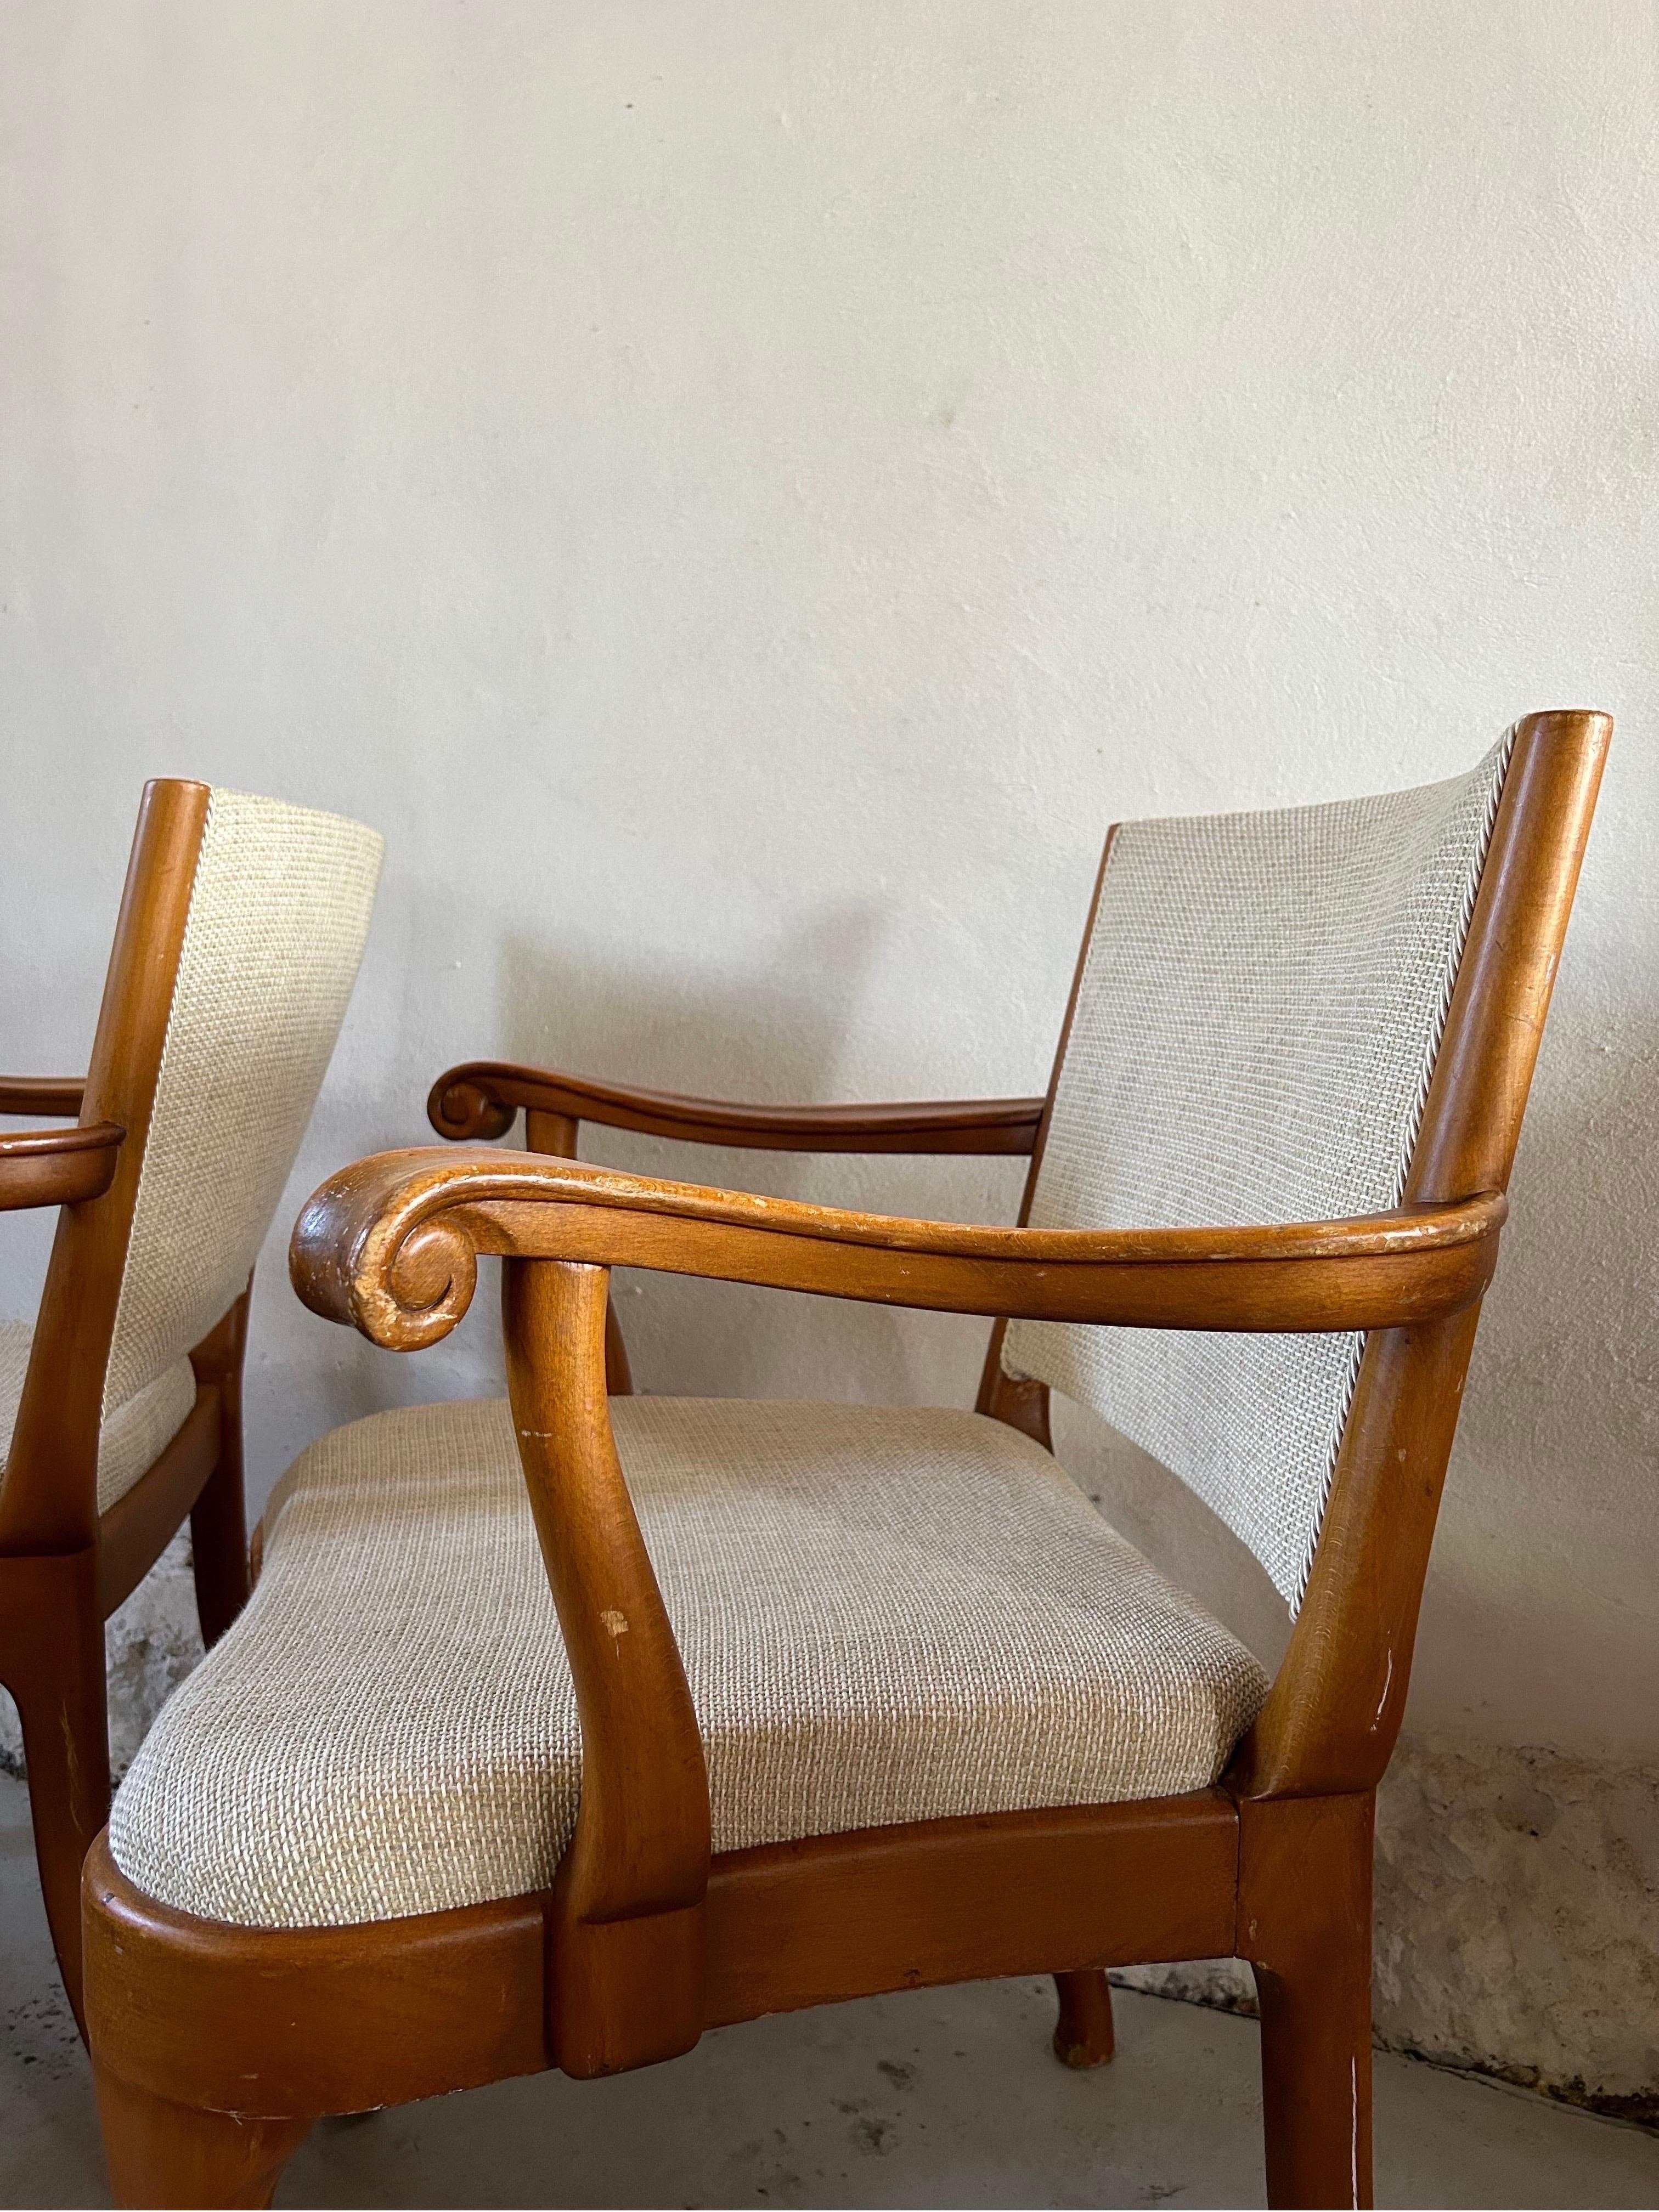 Early 20th Century Pair of Arts and Crafts Armchairs by Thorvald Jørgensen for Fritz Hansen 1910’s For Sale